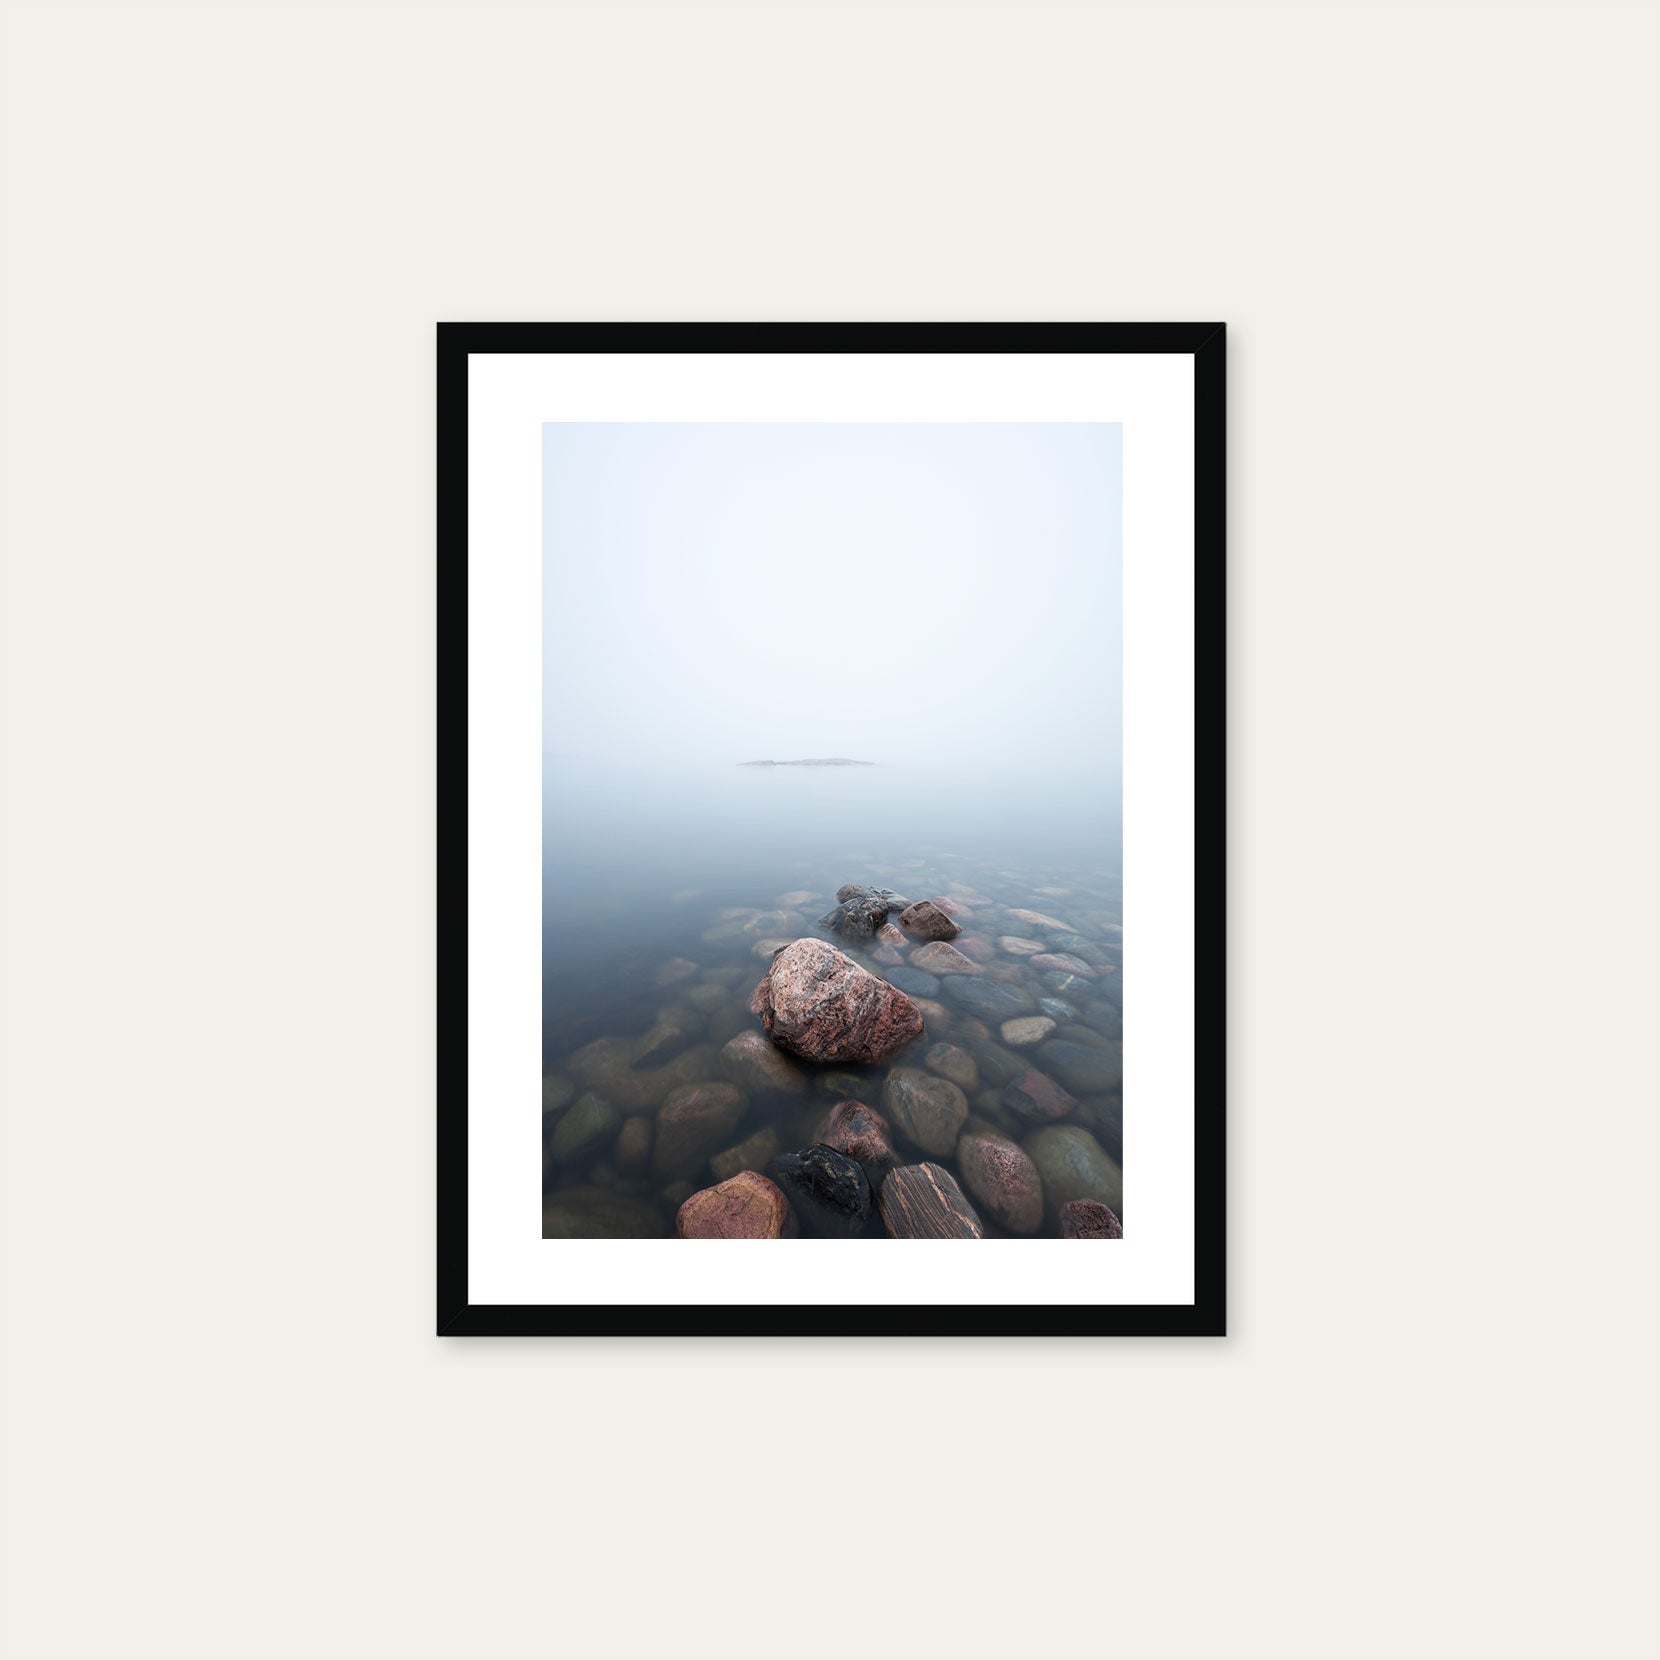 A black framed print of rocks in the sea on a foggy day